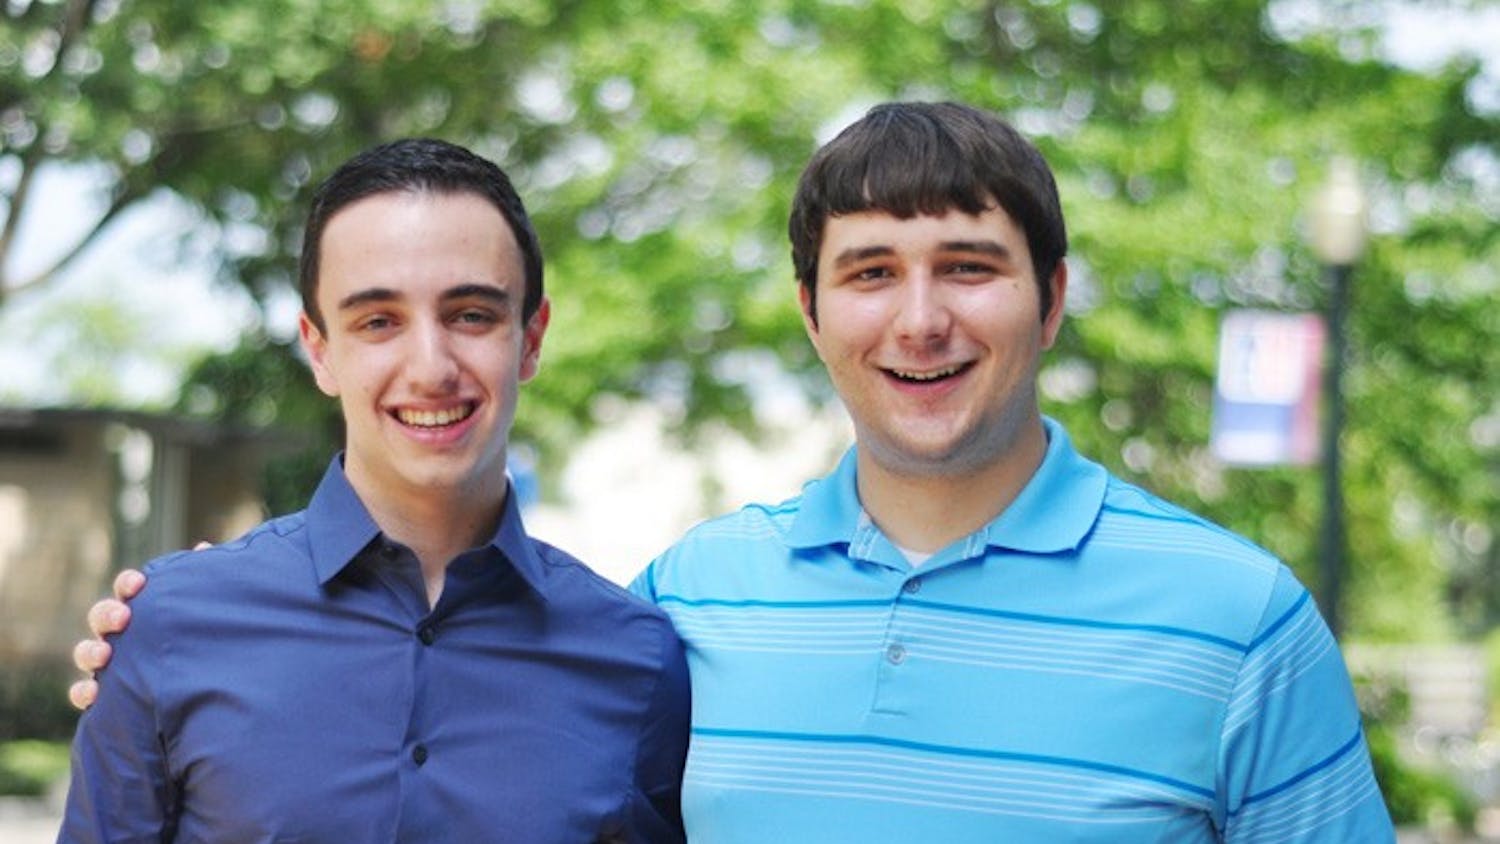 Rory Slatko (left) and Joe Wisniewski are running for ANC commissioner for 3D07 and 3D10 this November.